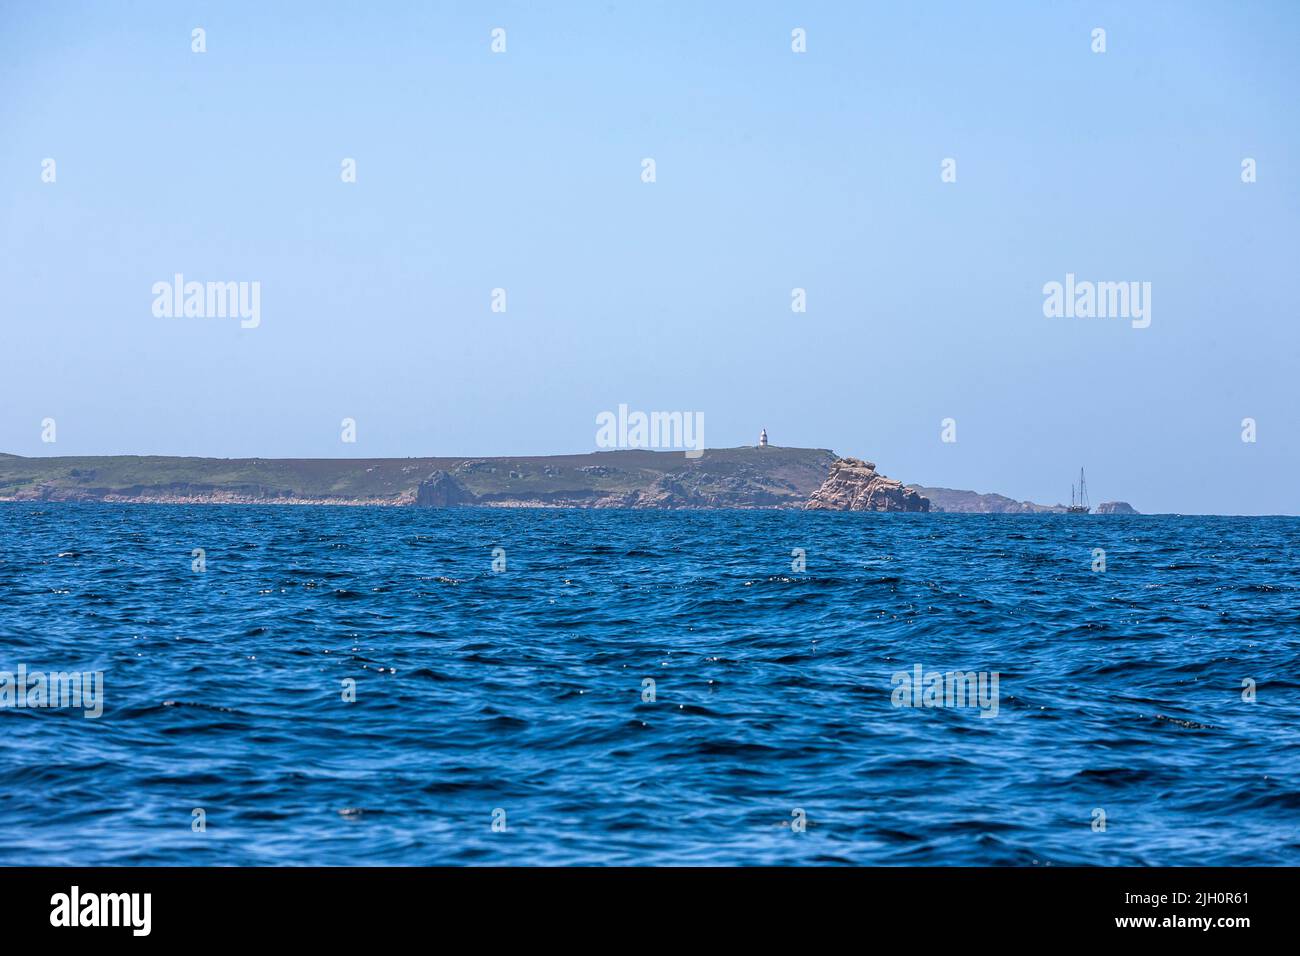 Approaching the Isles of Scilly by sea: the Eastern Isles and St. Martin's, with its distinctive Day Mark on the hilltop: Isles of Scilly, UK Stock Photo